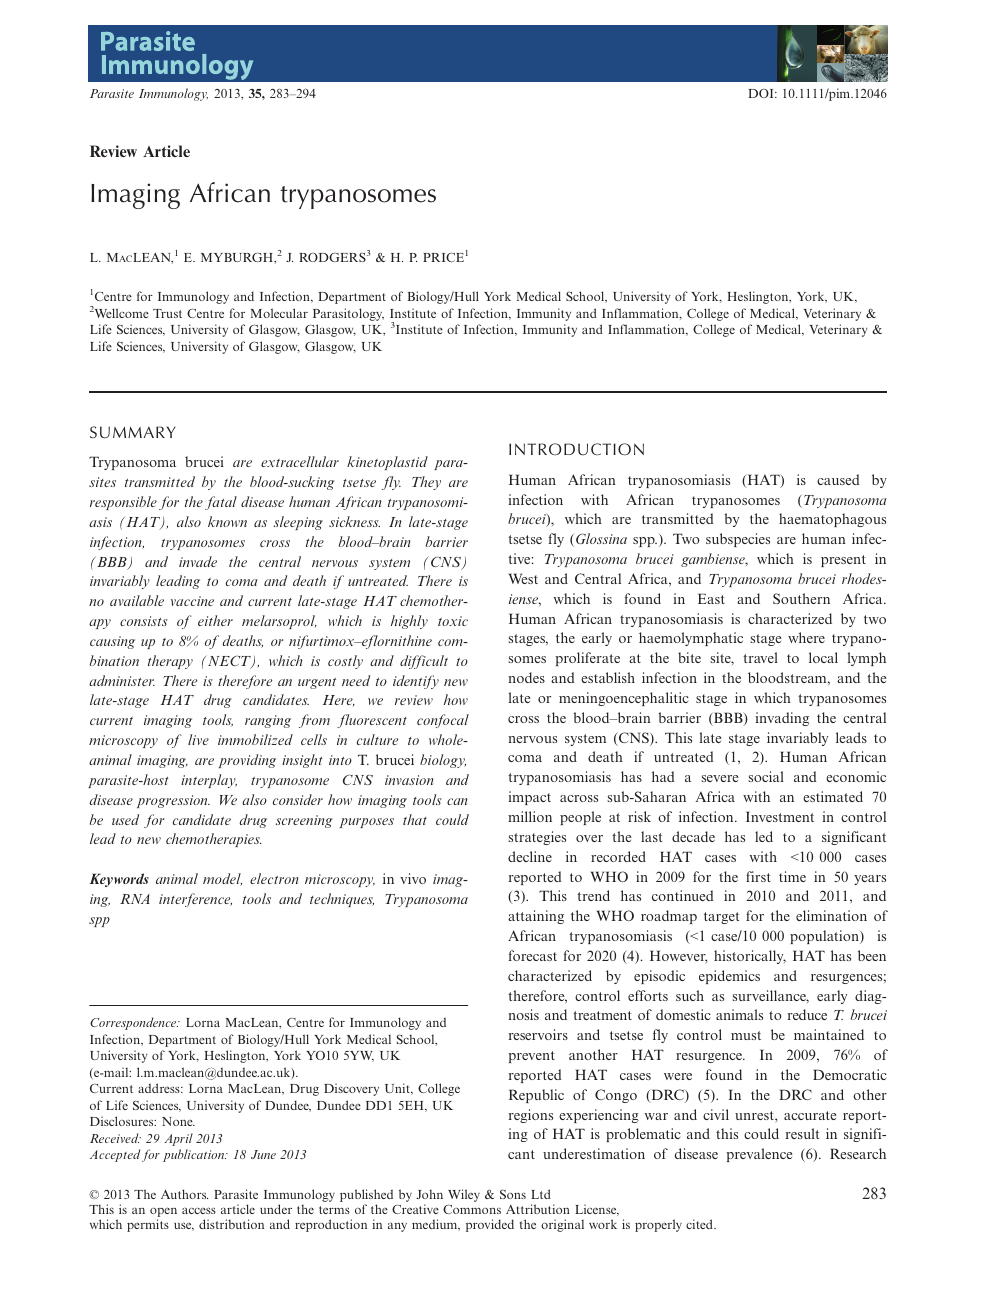 Imaging African Trypanosomes Topic Of Research Paper In Biological Sciences Download Scholarly Article Pdf And Read For Free On Cyberleninka Open Science Hub